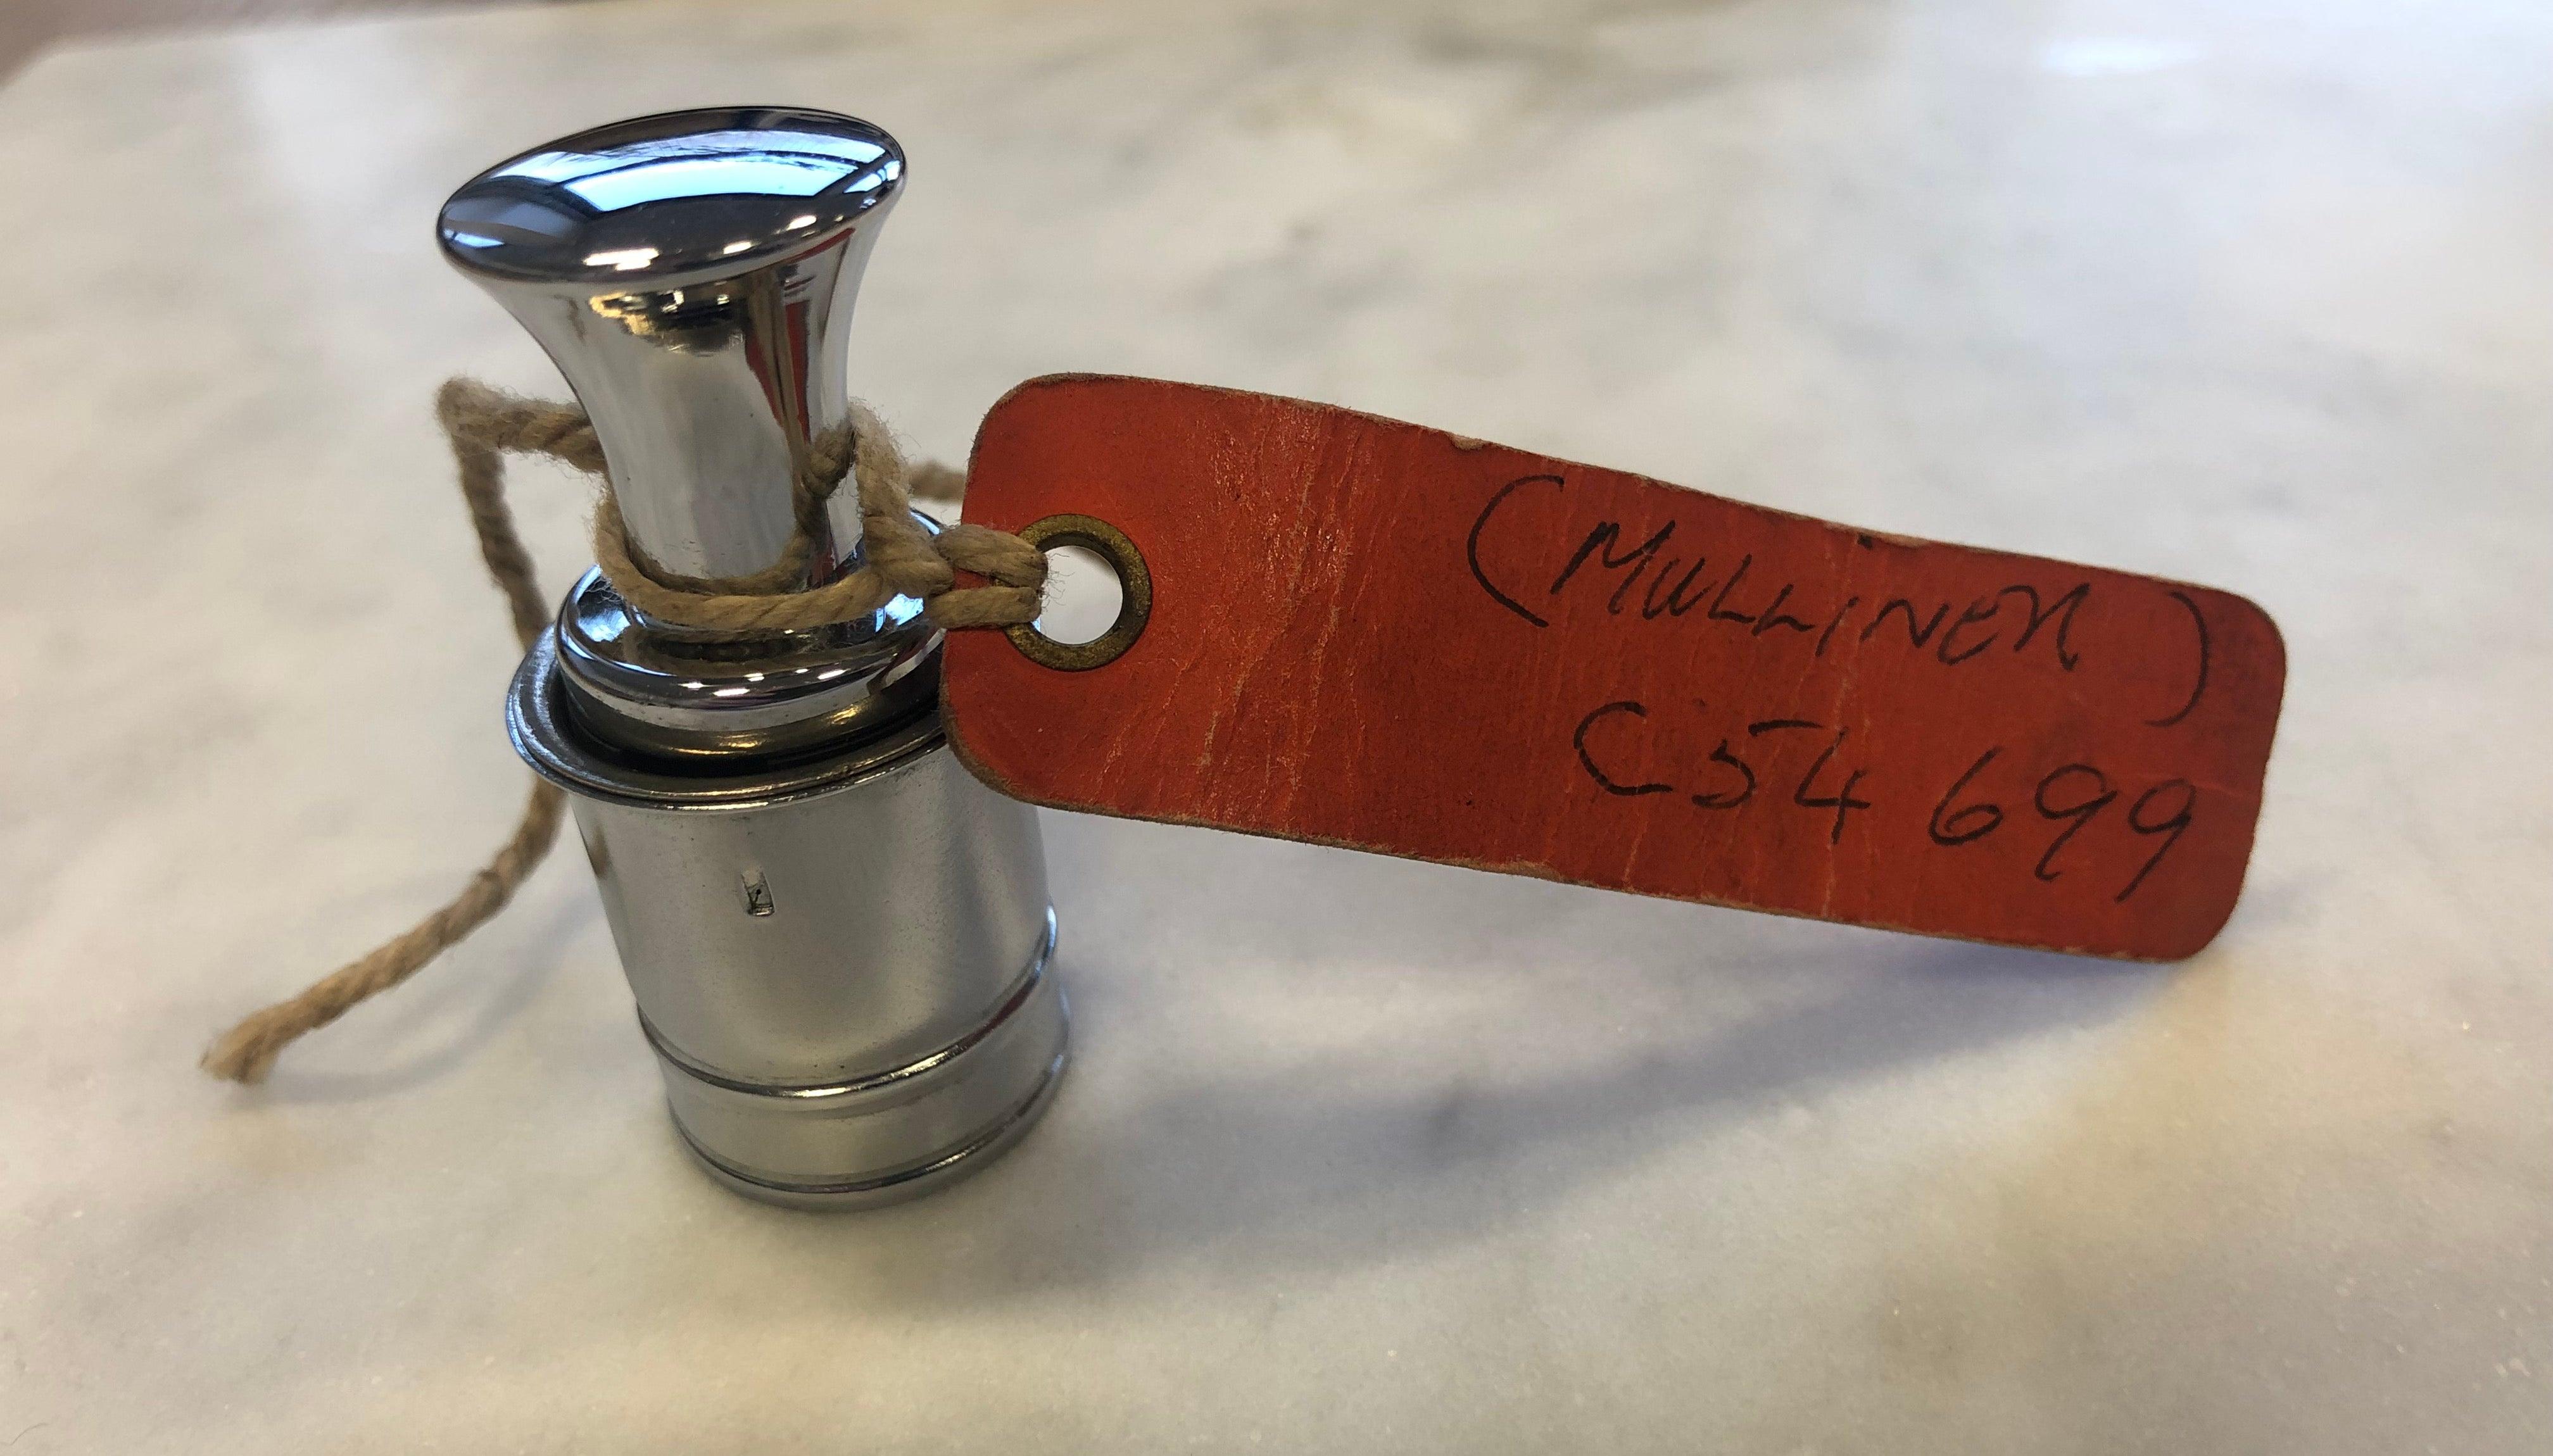 A cigarette lighter from John Lennon’s celebrated white Rolls-Royce Phantom 5
Signed handsomely by Lennon on the attached tag
Gifted by Lennon to a mechanic friend in the late 1960s

A silver car lighter from John Lennon’s celebrated white